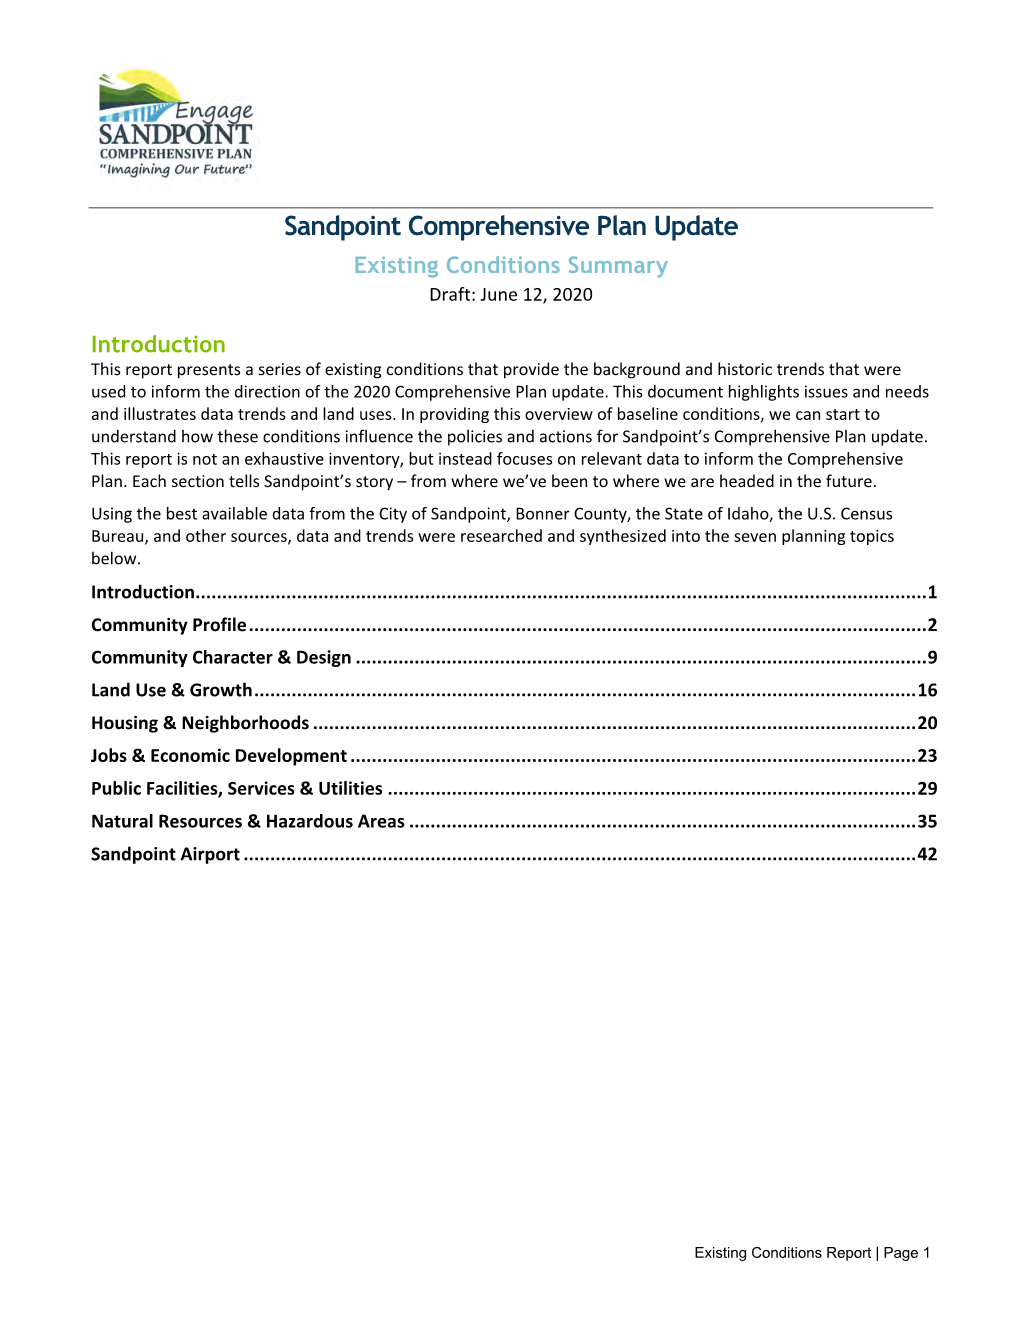 Sandpoint Comprehensive Plan Update Existing Conditions Summary Draft: June 12, 2020